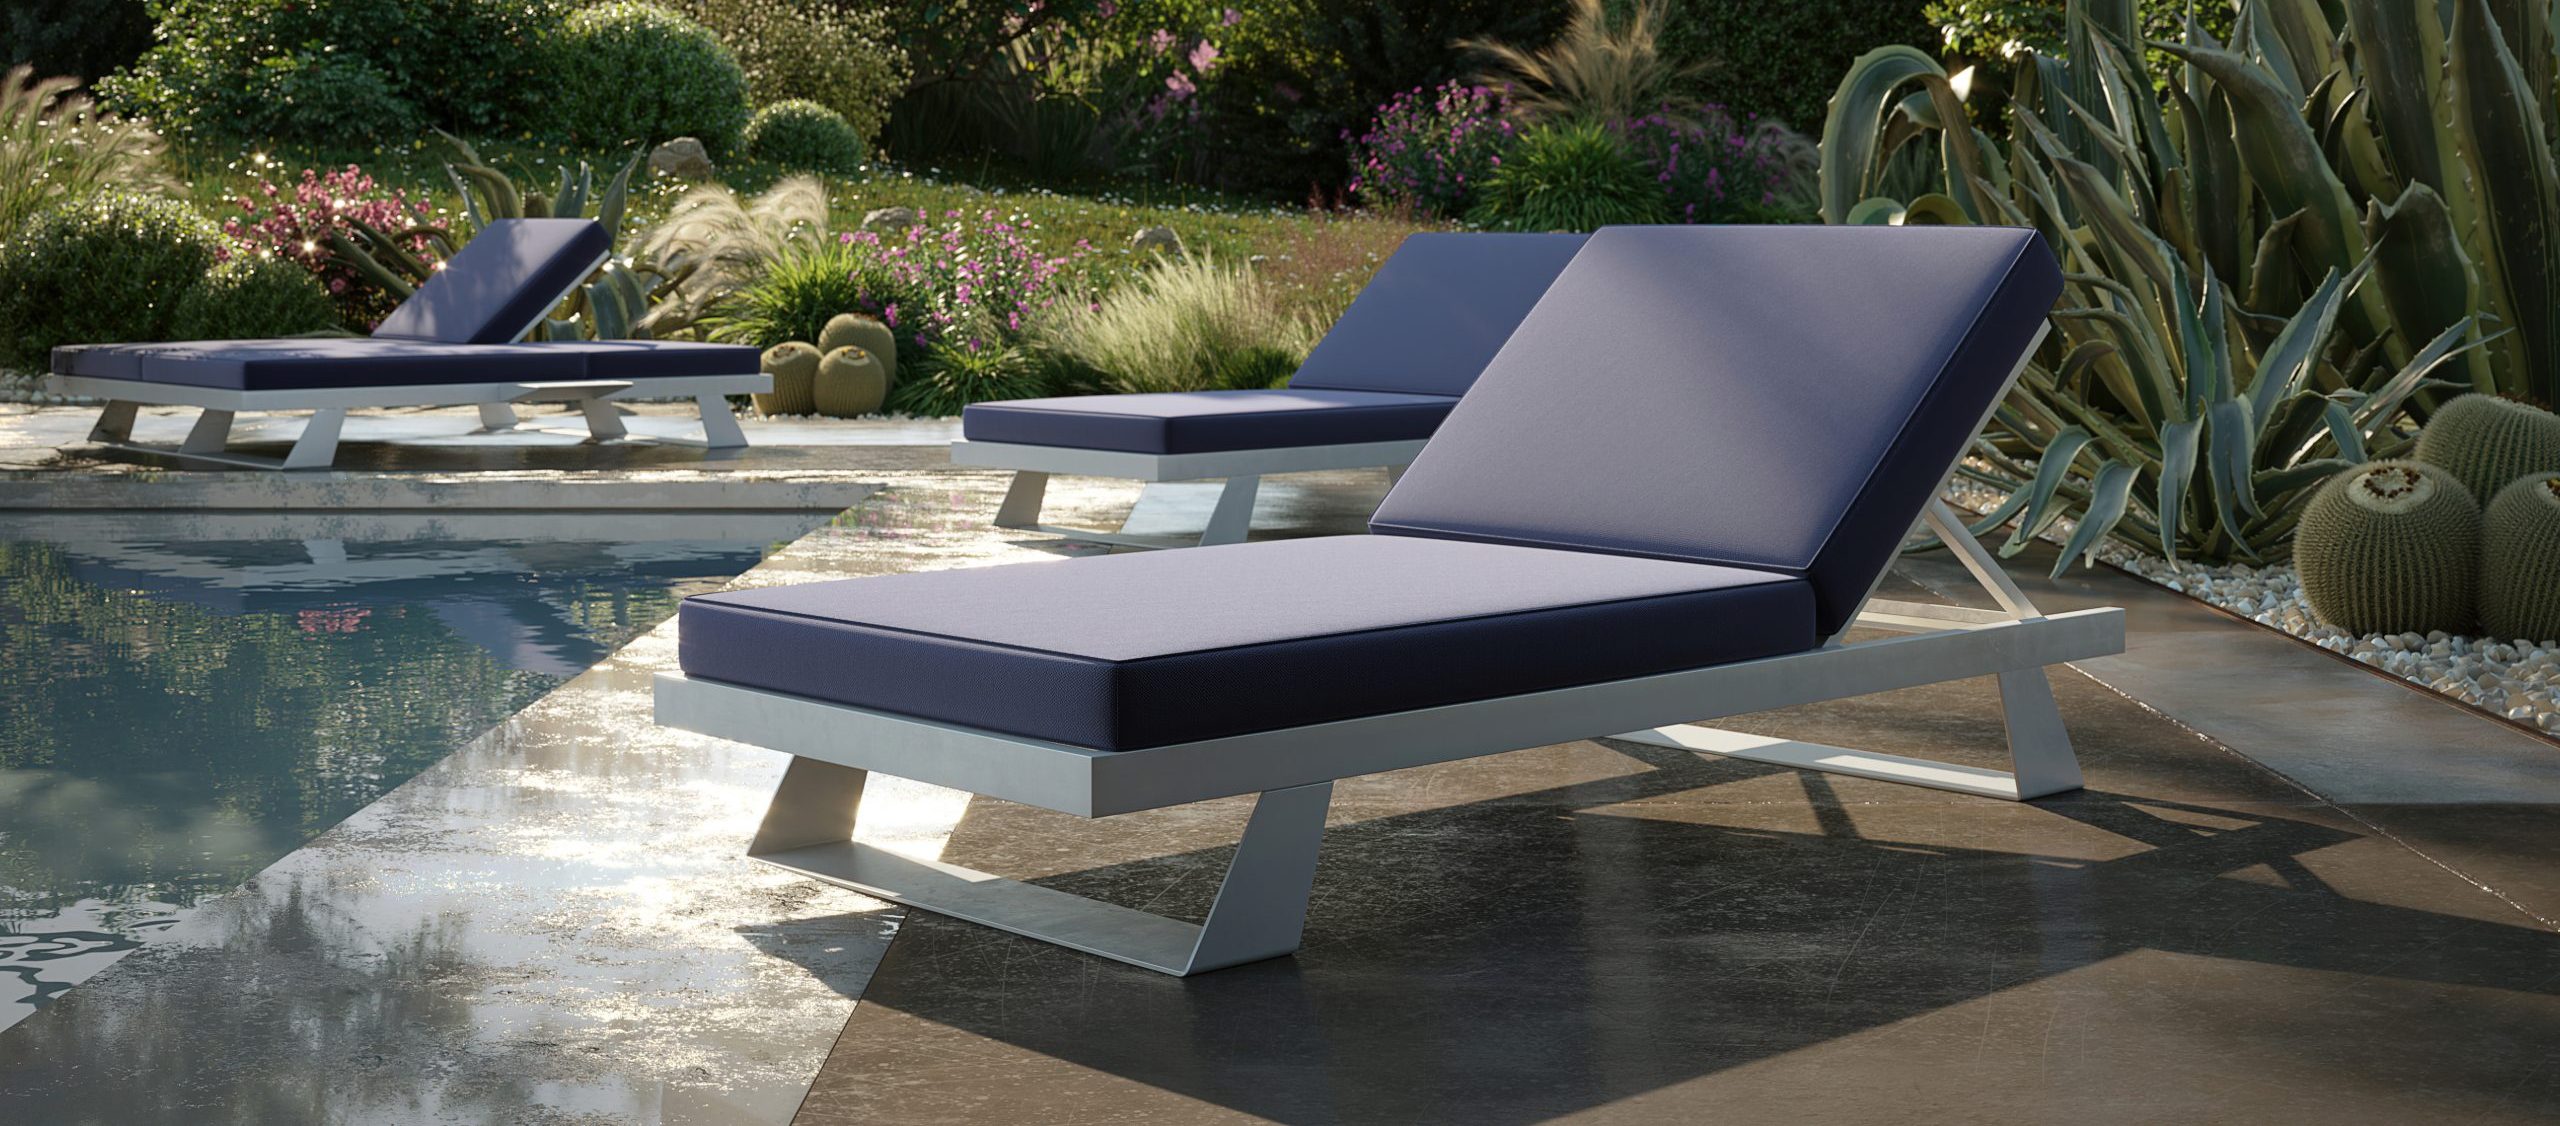 Naxos lounge chair outdoor